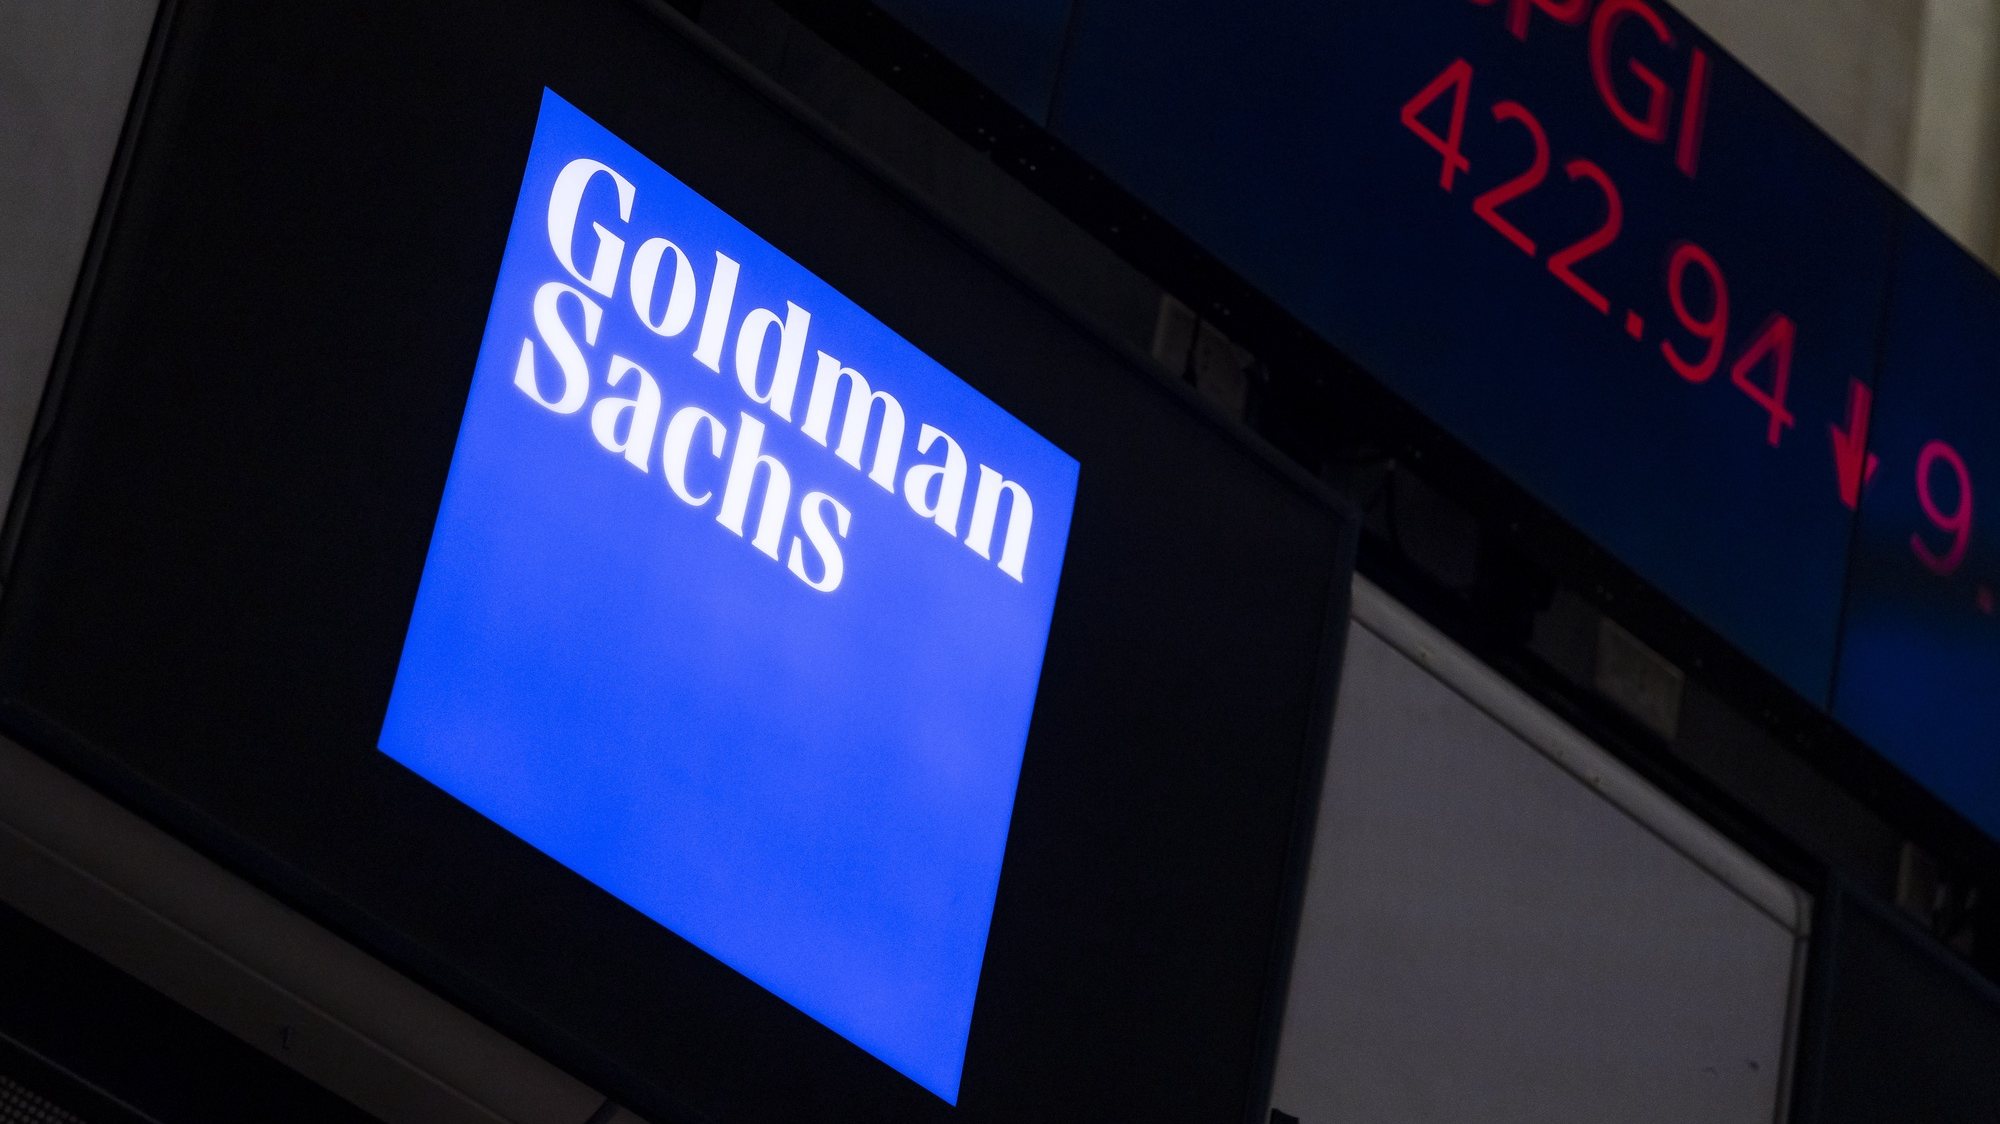 epa09693418 A sign for the bank Goldman Sachs on the floor of the New York Stock Exchange in New York, New York, USA, on 18 January 2022. Goldman Sachs posted quarterly profit below analysts’ estimates as trading revenue slumped, sending its shares down more than 8 percent in Tuesday&#039;s morning trading session.  EPA/JUSTIN LANE